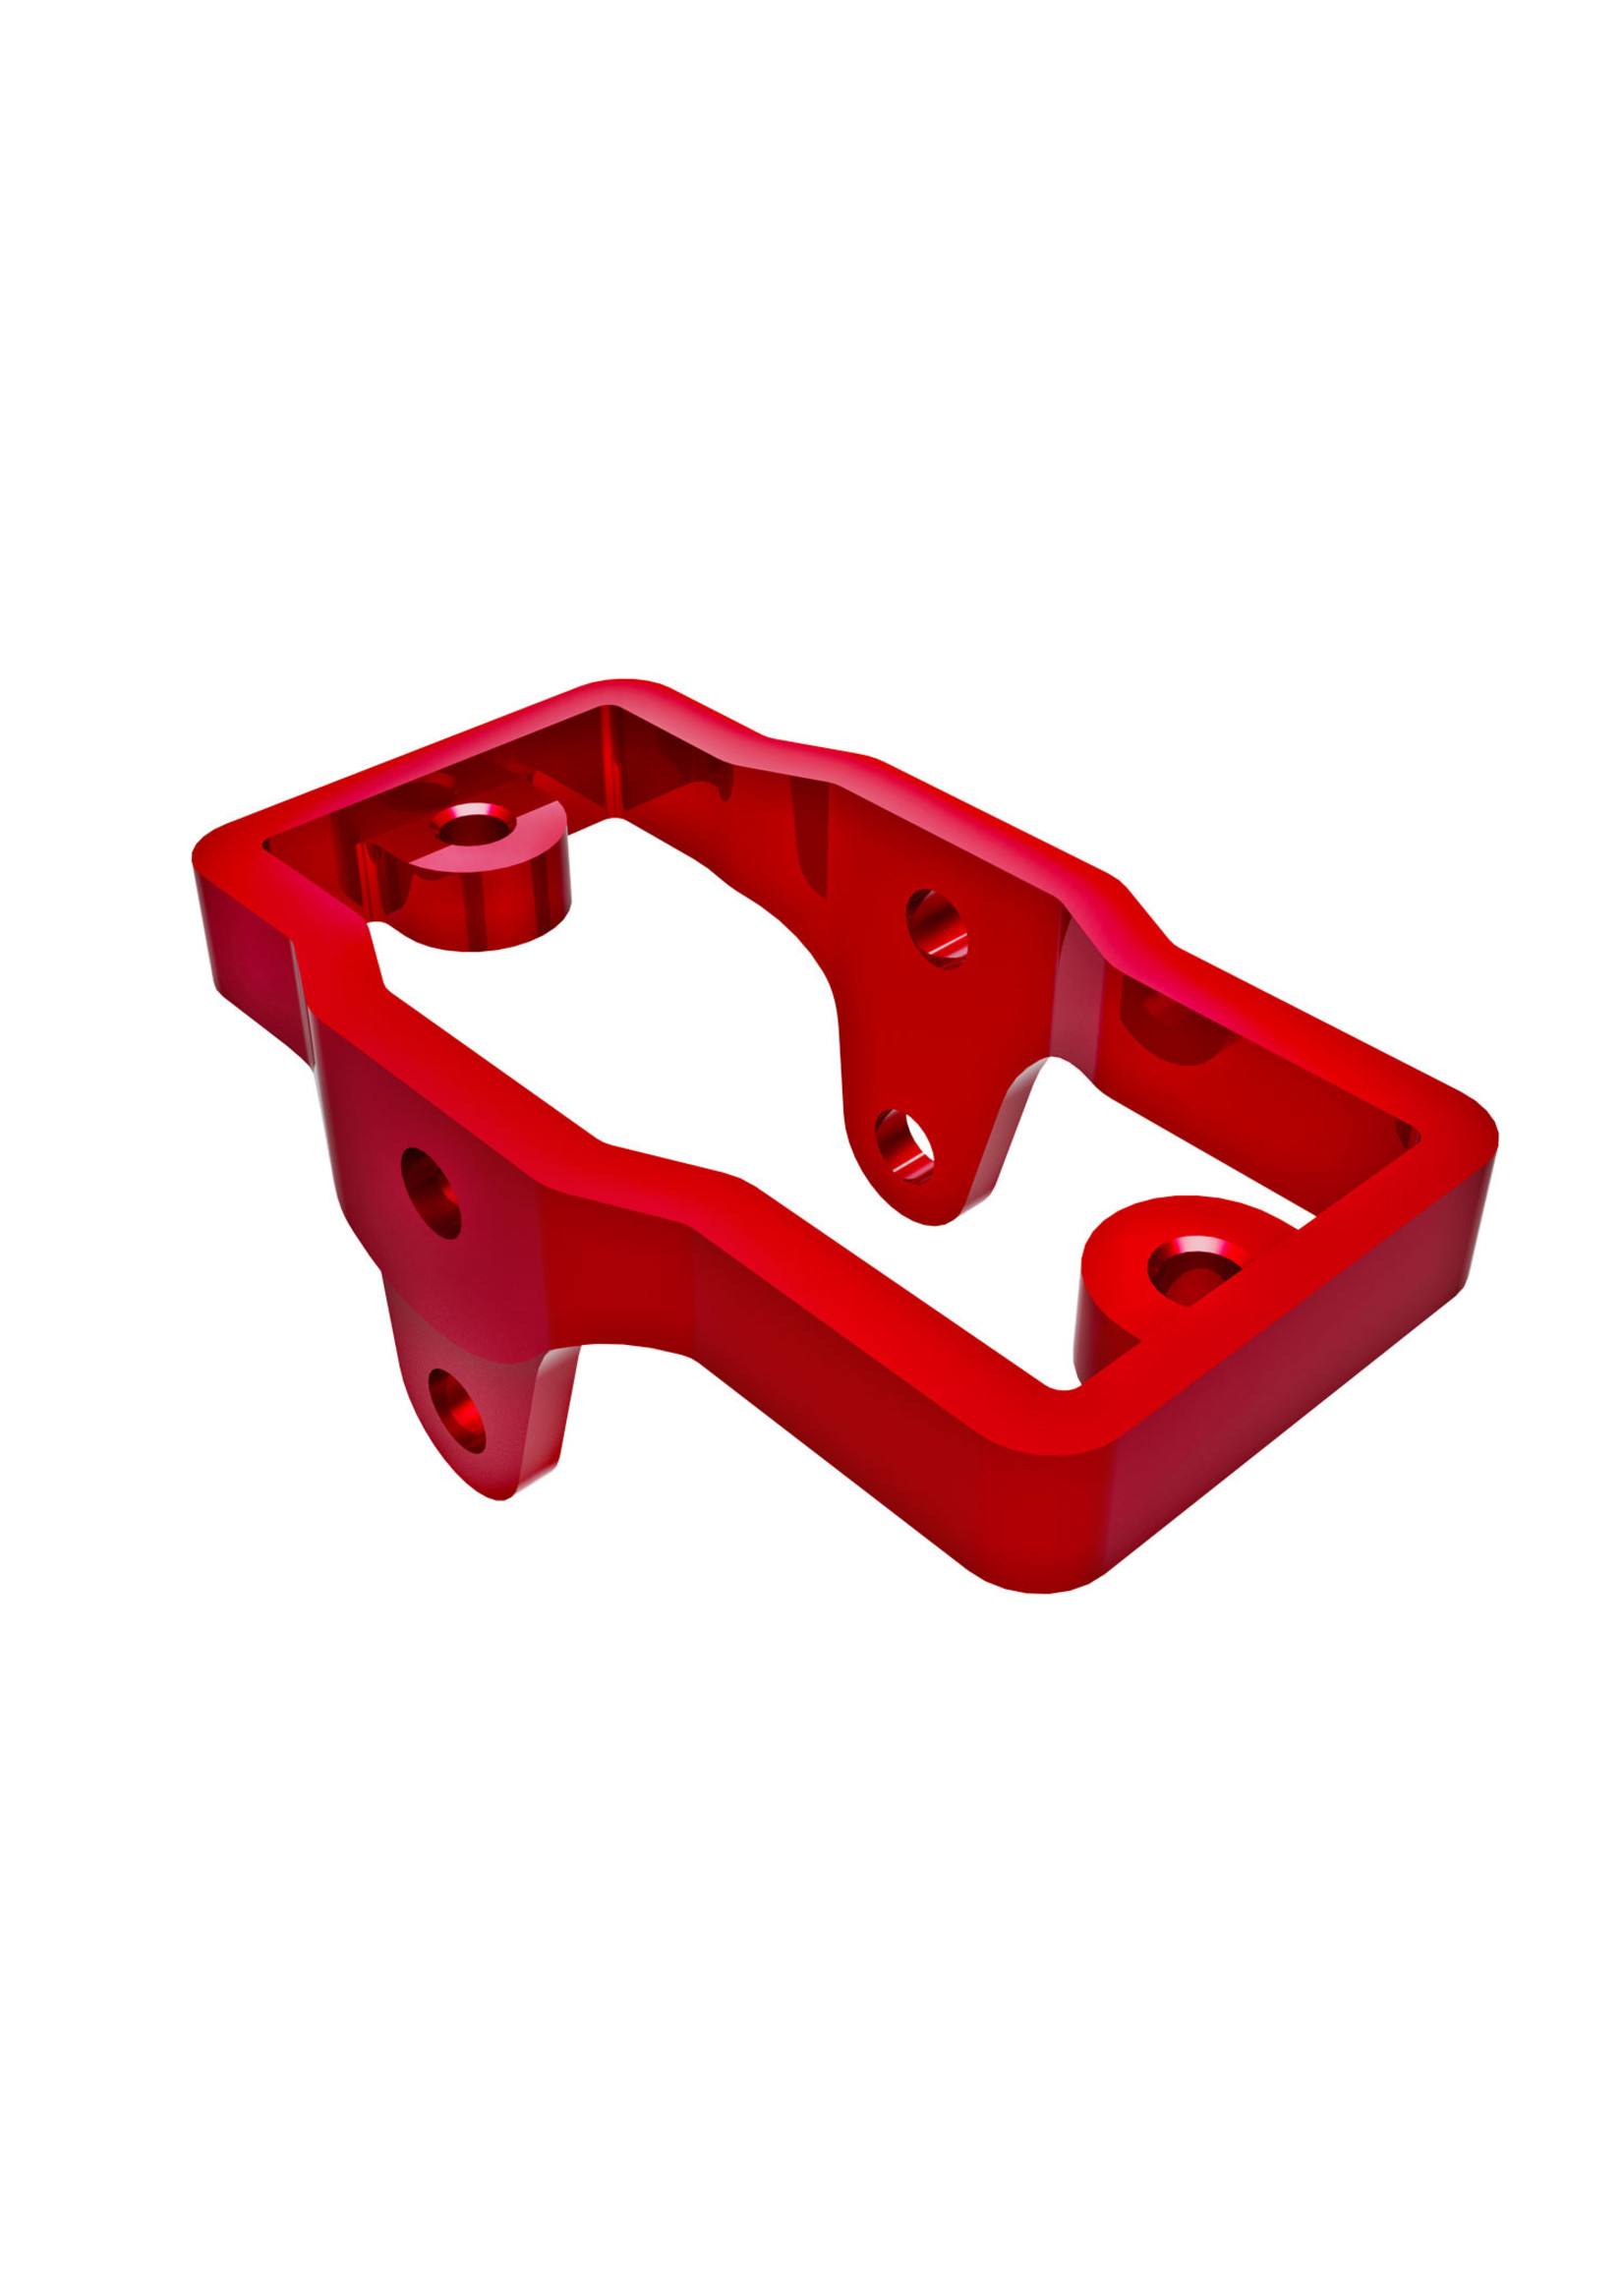 Traxxas 9739RED - 6061-T6 Aluminum Servo Mount - Red